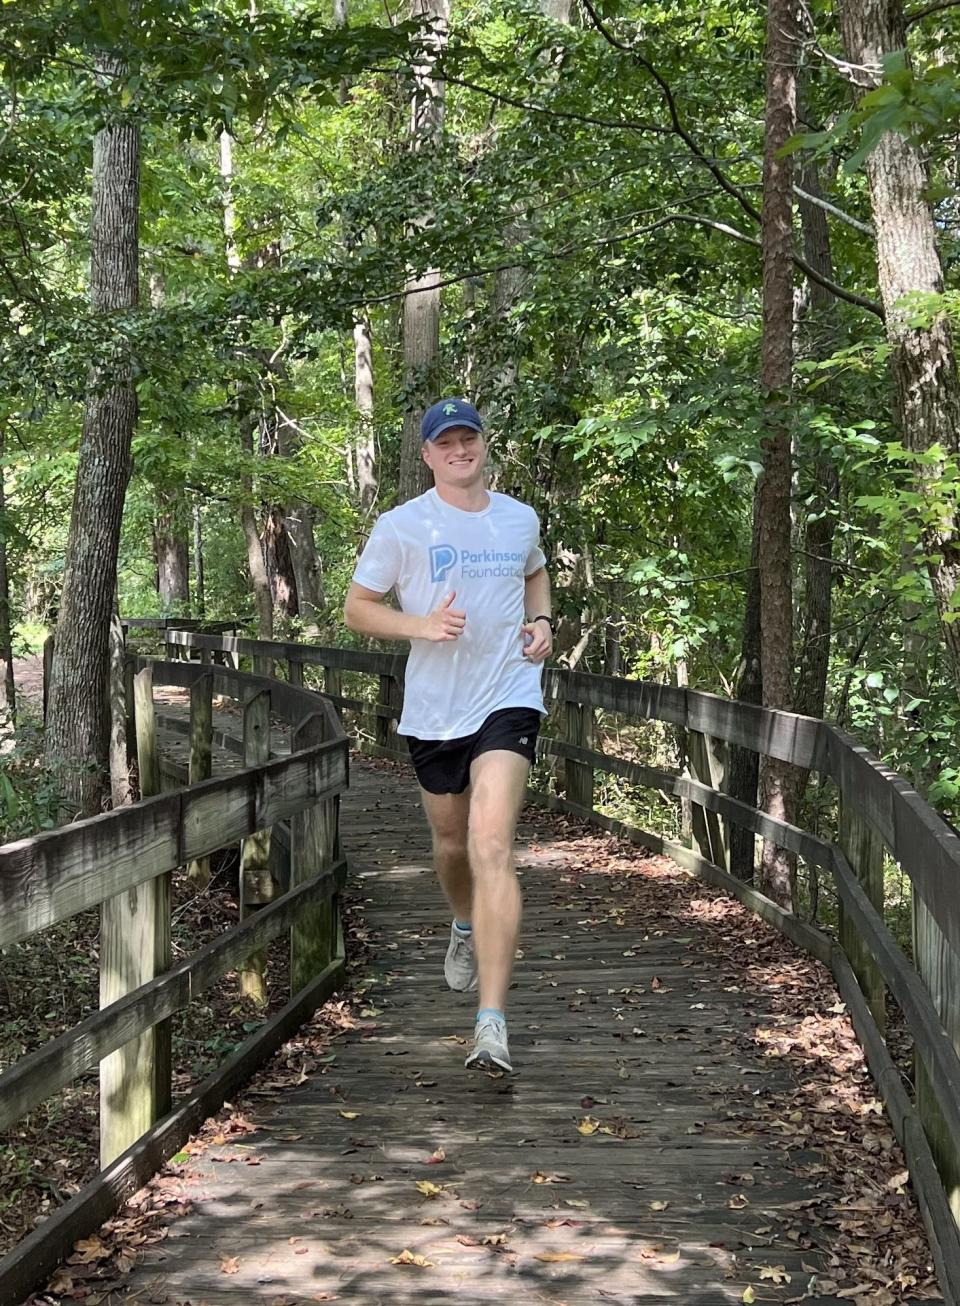 University of Georgia senior Christian Spence will run in an ultramarathon, a race about 31 miles long, on Dec. 16-17, 2023, as a fundraiser for Parkinson's Disease research and to honor his father, who has the disease.